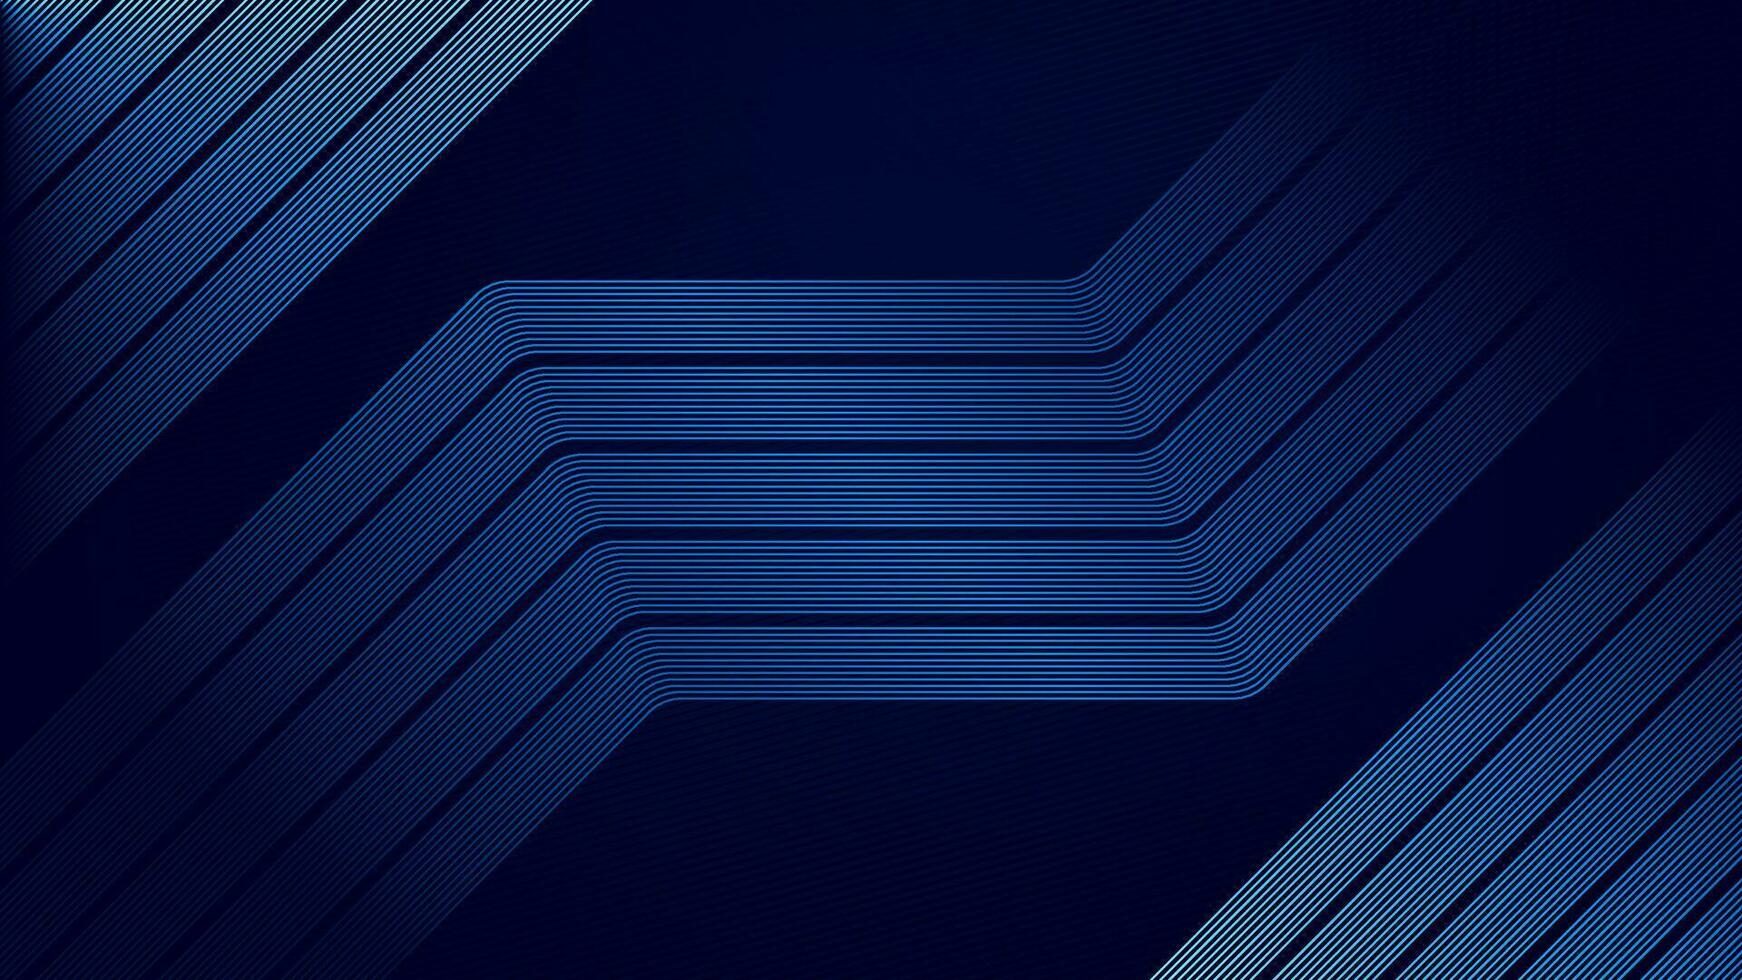 Abstract dark blue background with diagonal lines. Vector illustration eps10